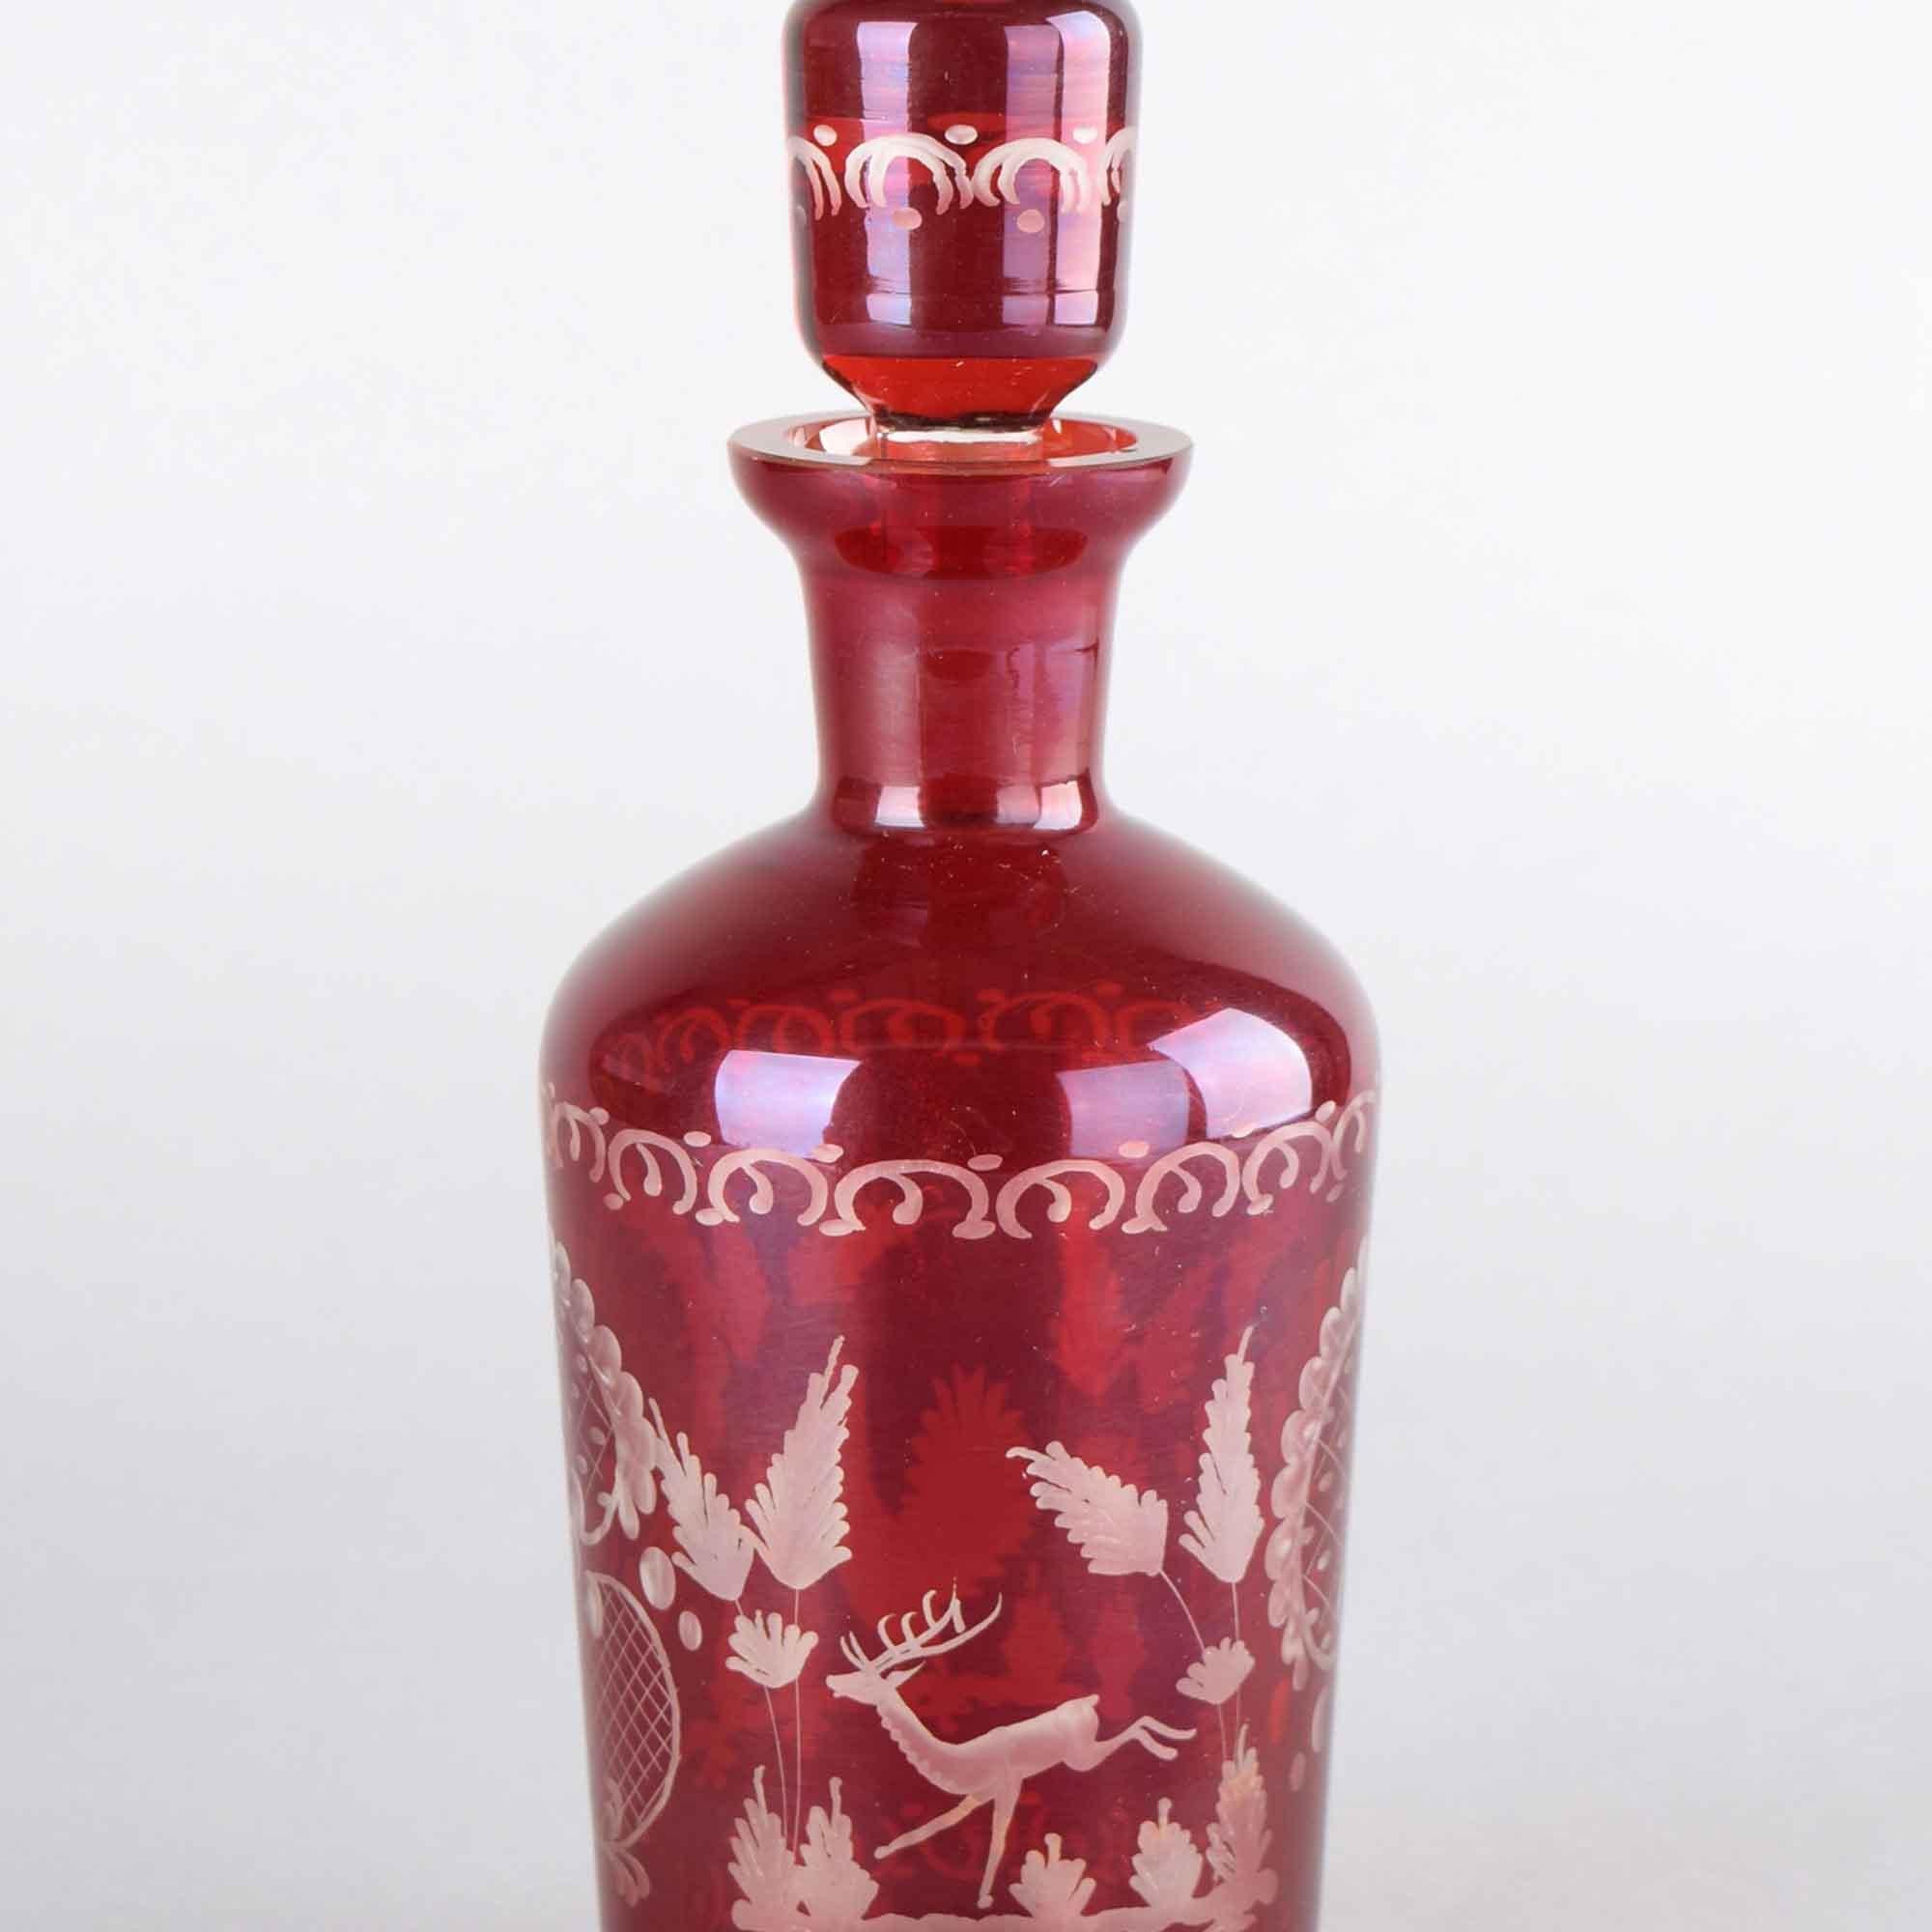 Red glass carafe is an original decorative object realized in the end of the 19th century.

Original thick-walled opaline glass. Made in Germany. 

Mint conditions.

Fine ruby red carafe realized in thick-walled clear glass with narrow neck